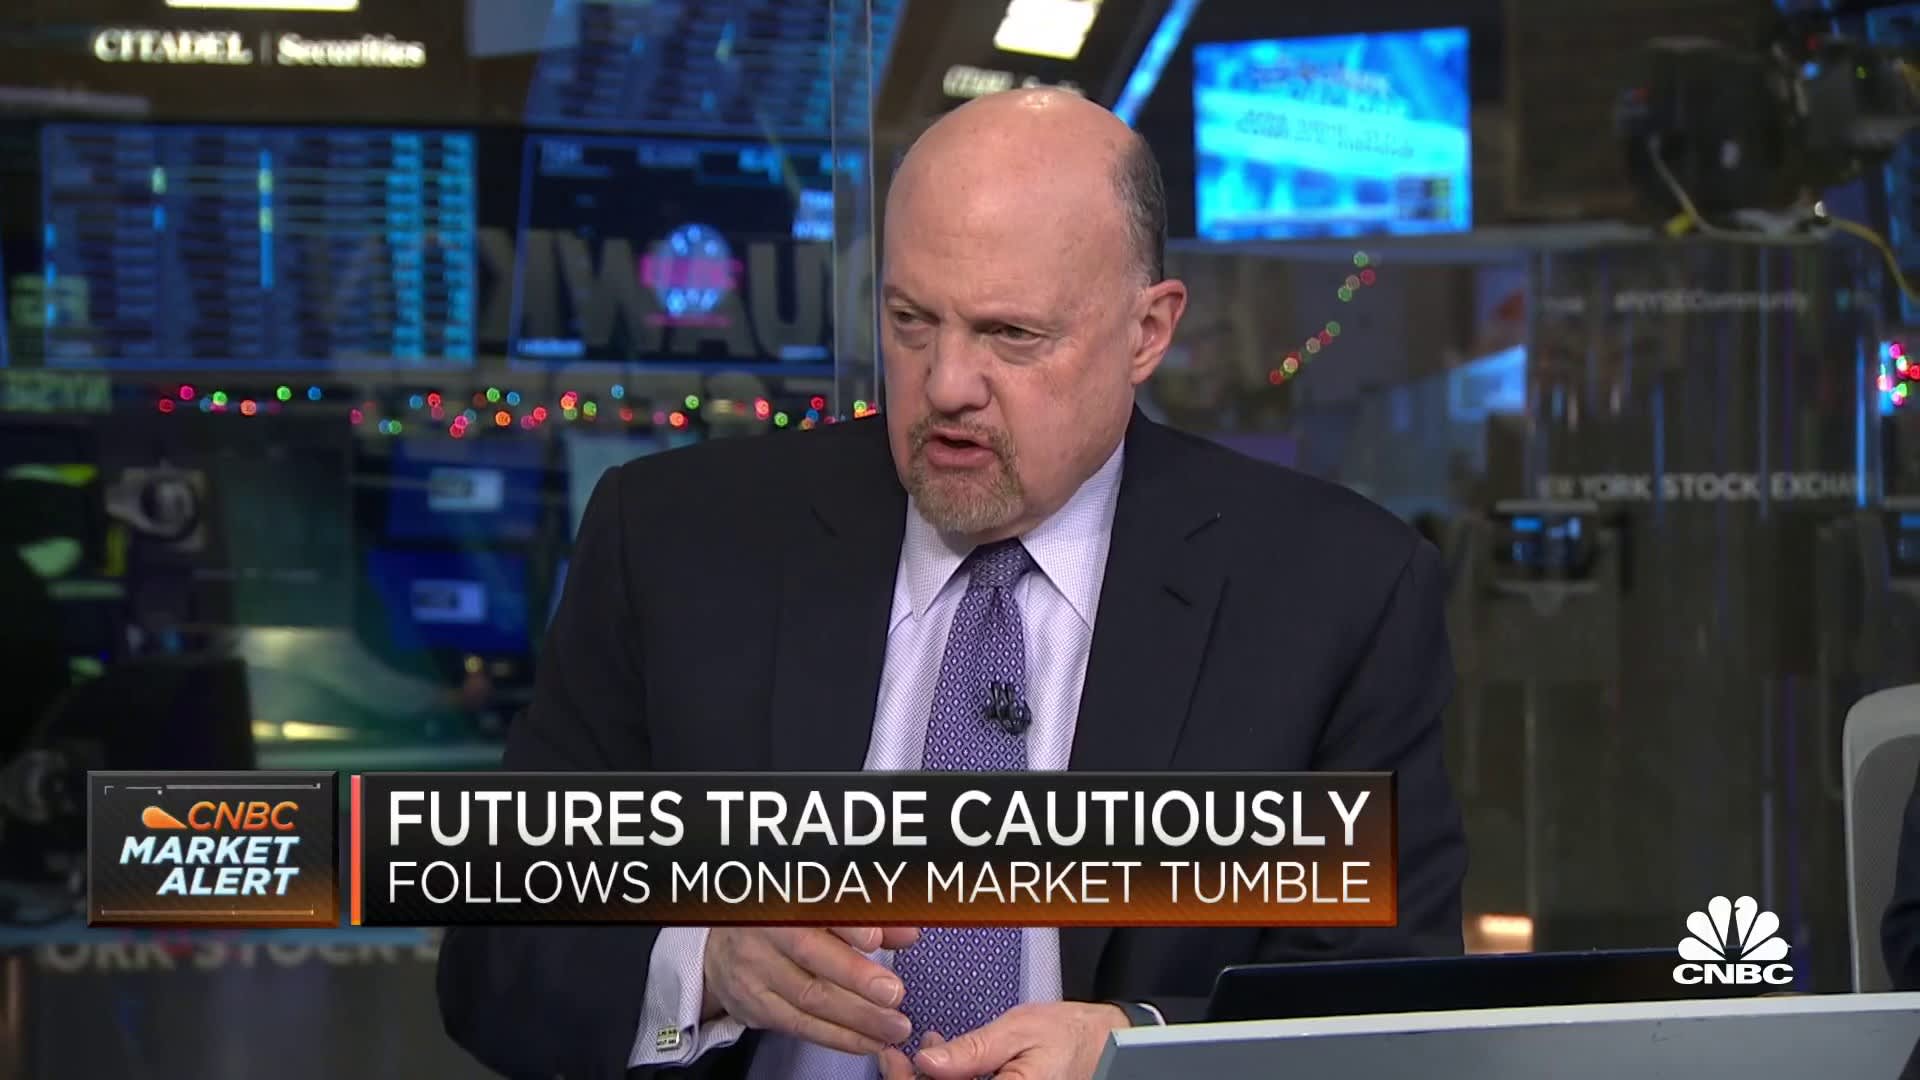 Jim Cramer explains why he disagrees with Jamie Dimon's economic outlook